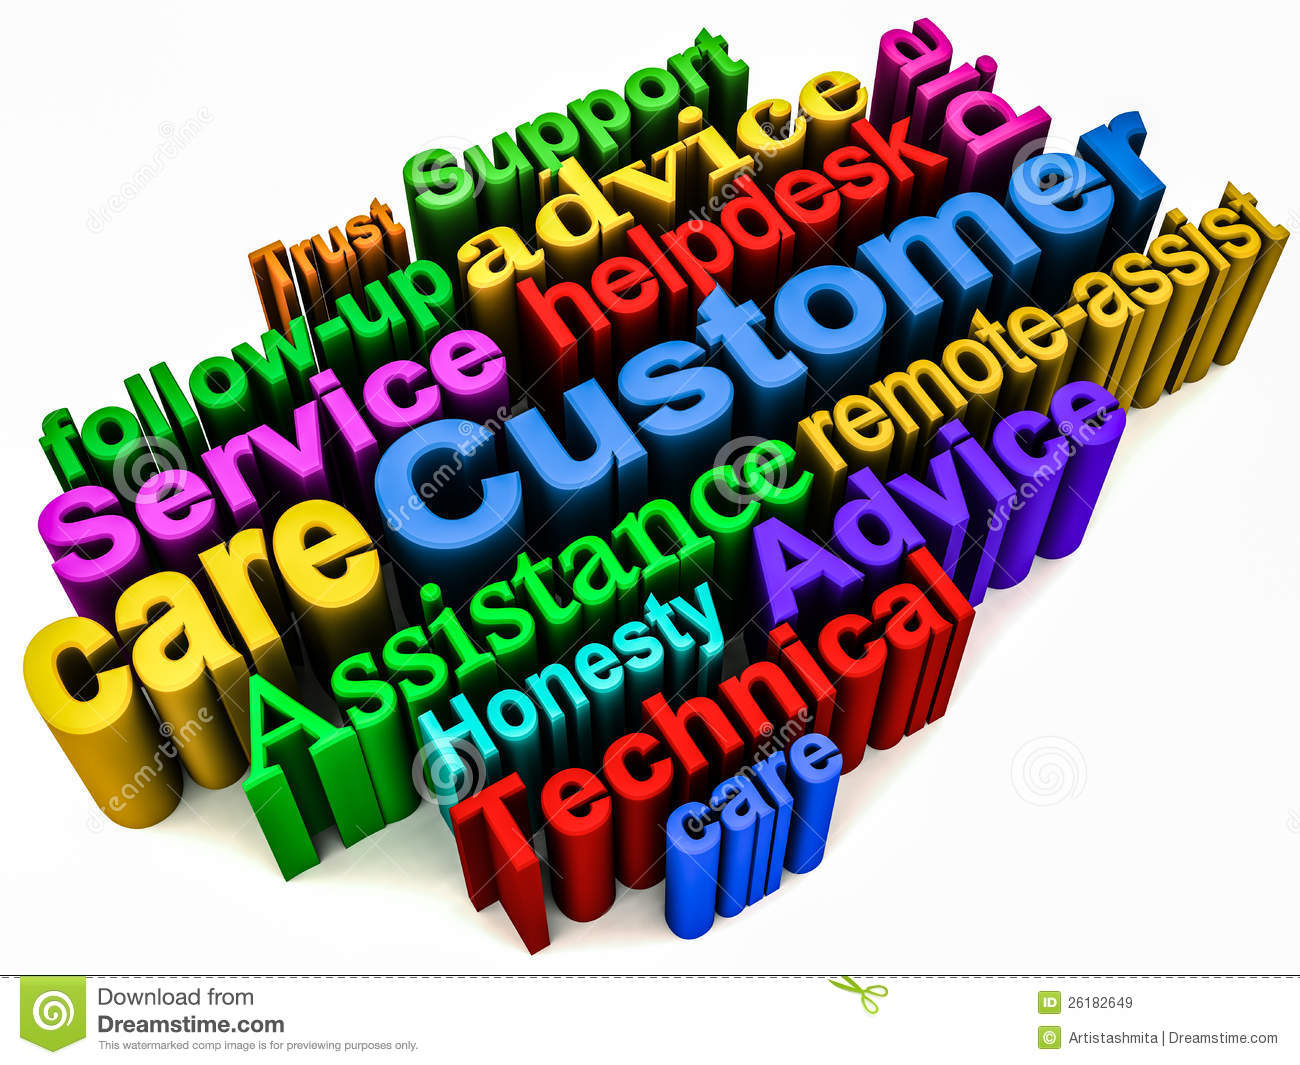 Customer Care Support Royalty Free Stock Images   Image  26182649